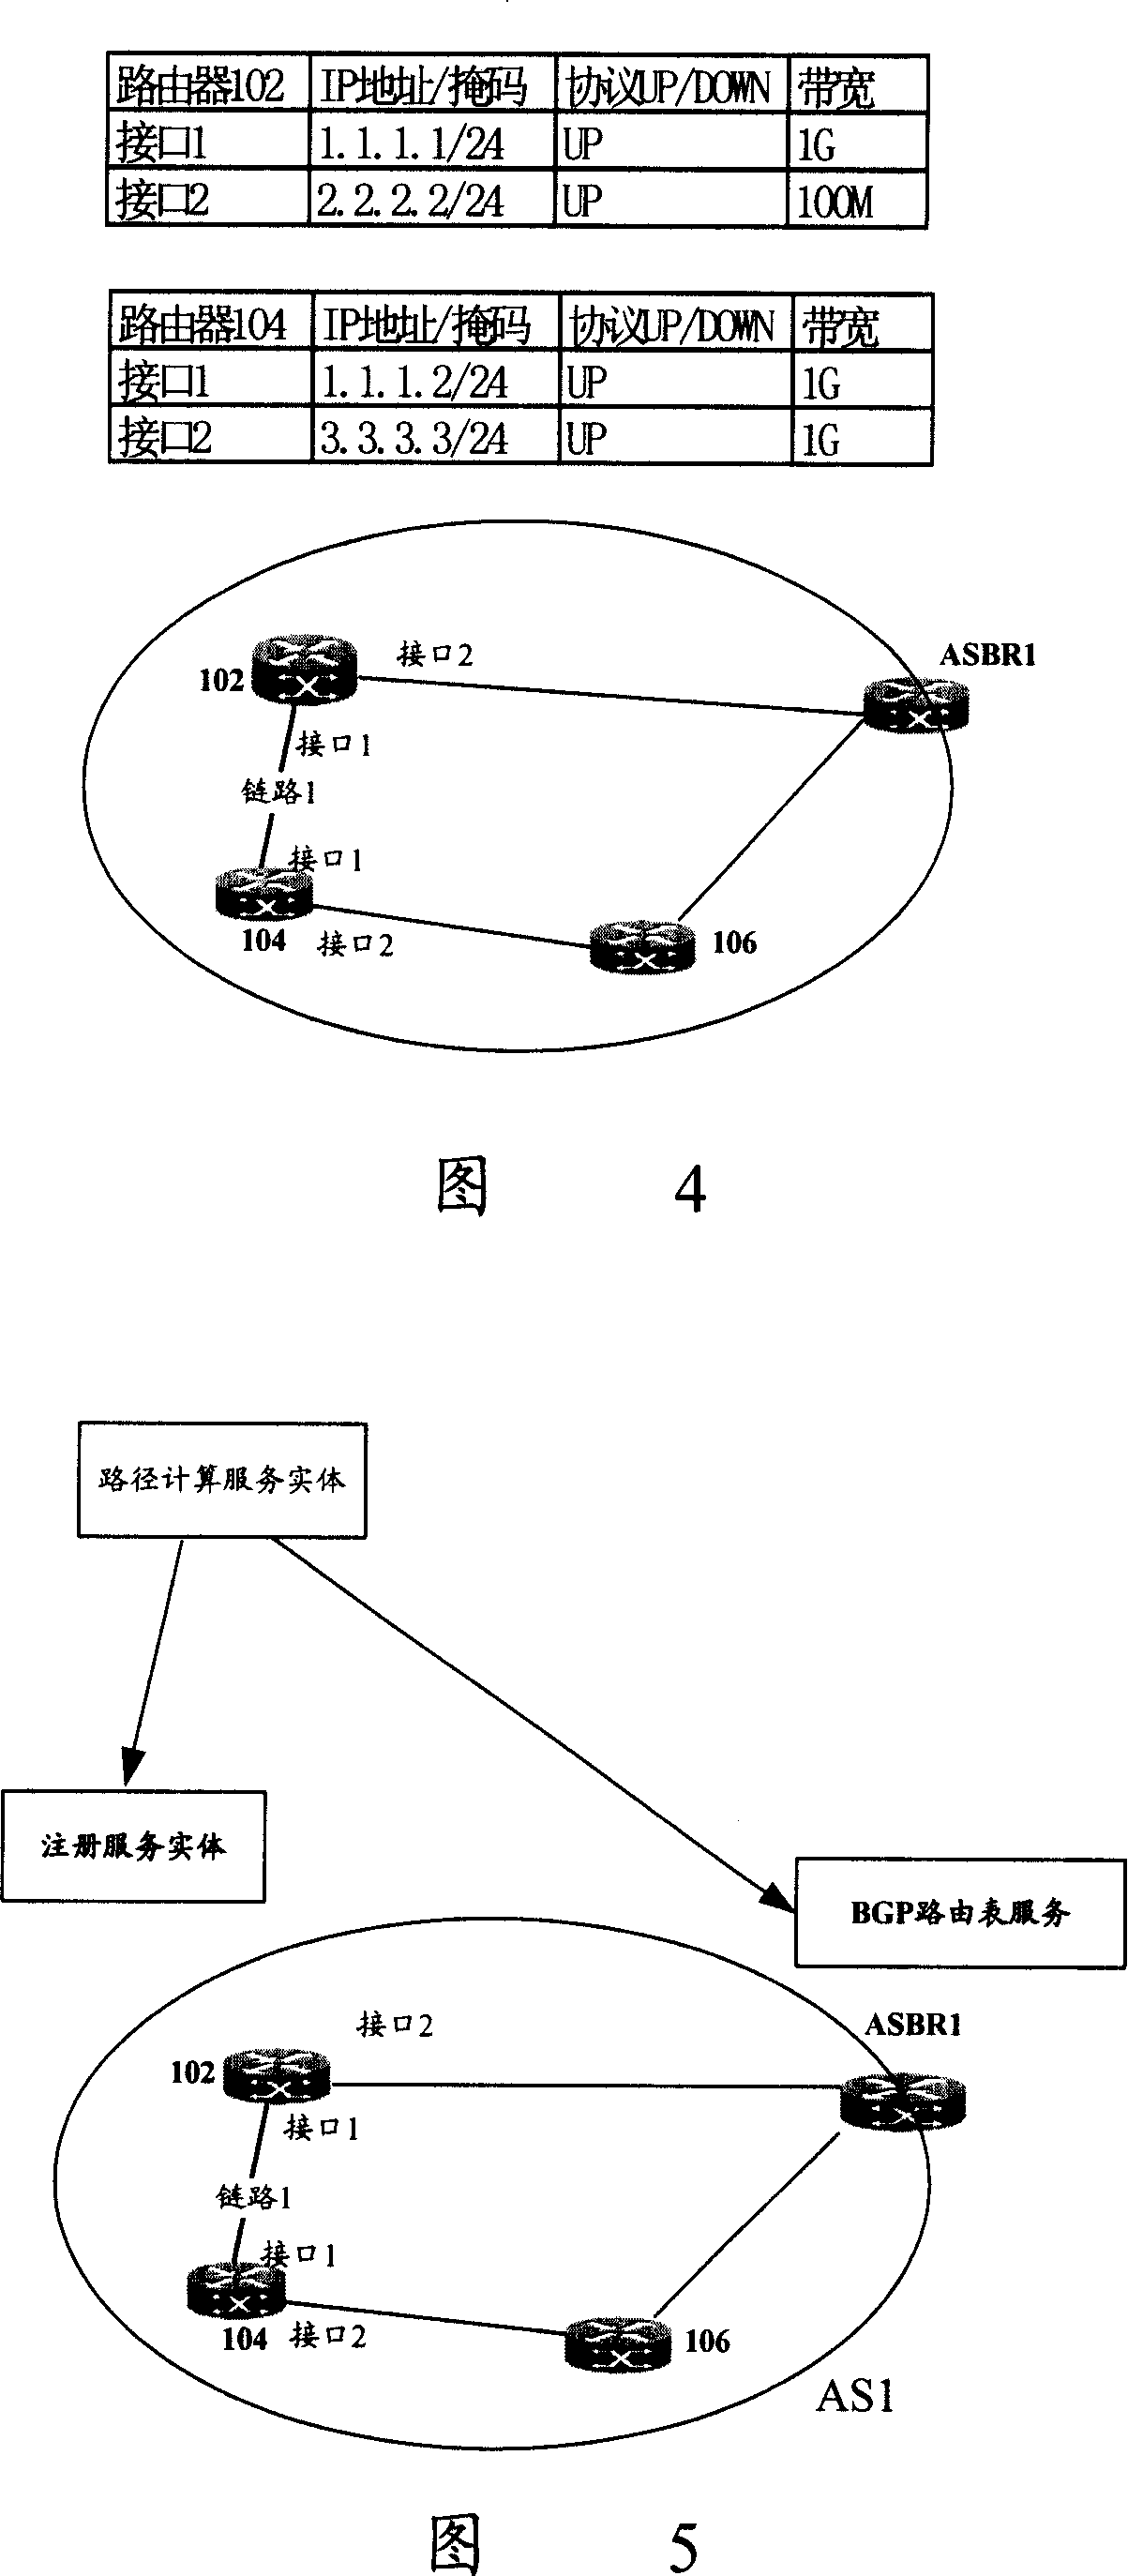 Path computation and network topological method, structure, system, entity and router